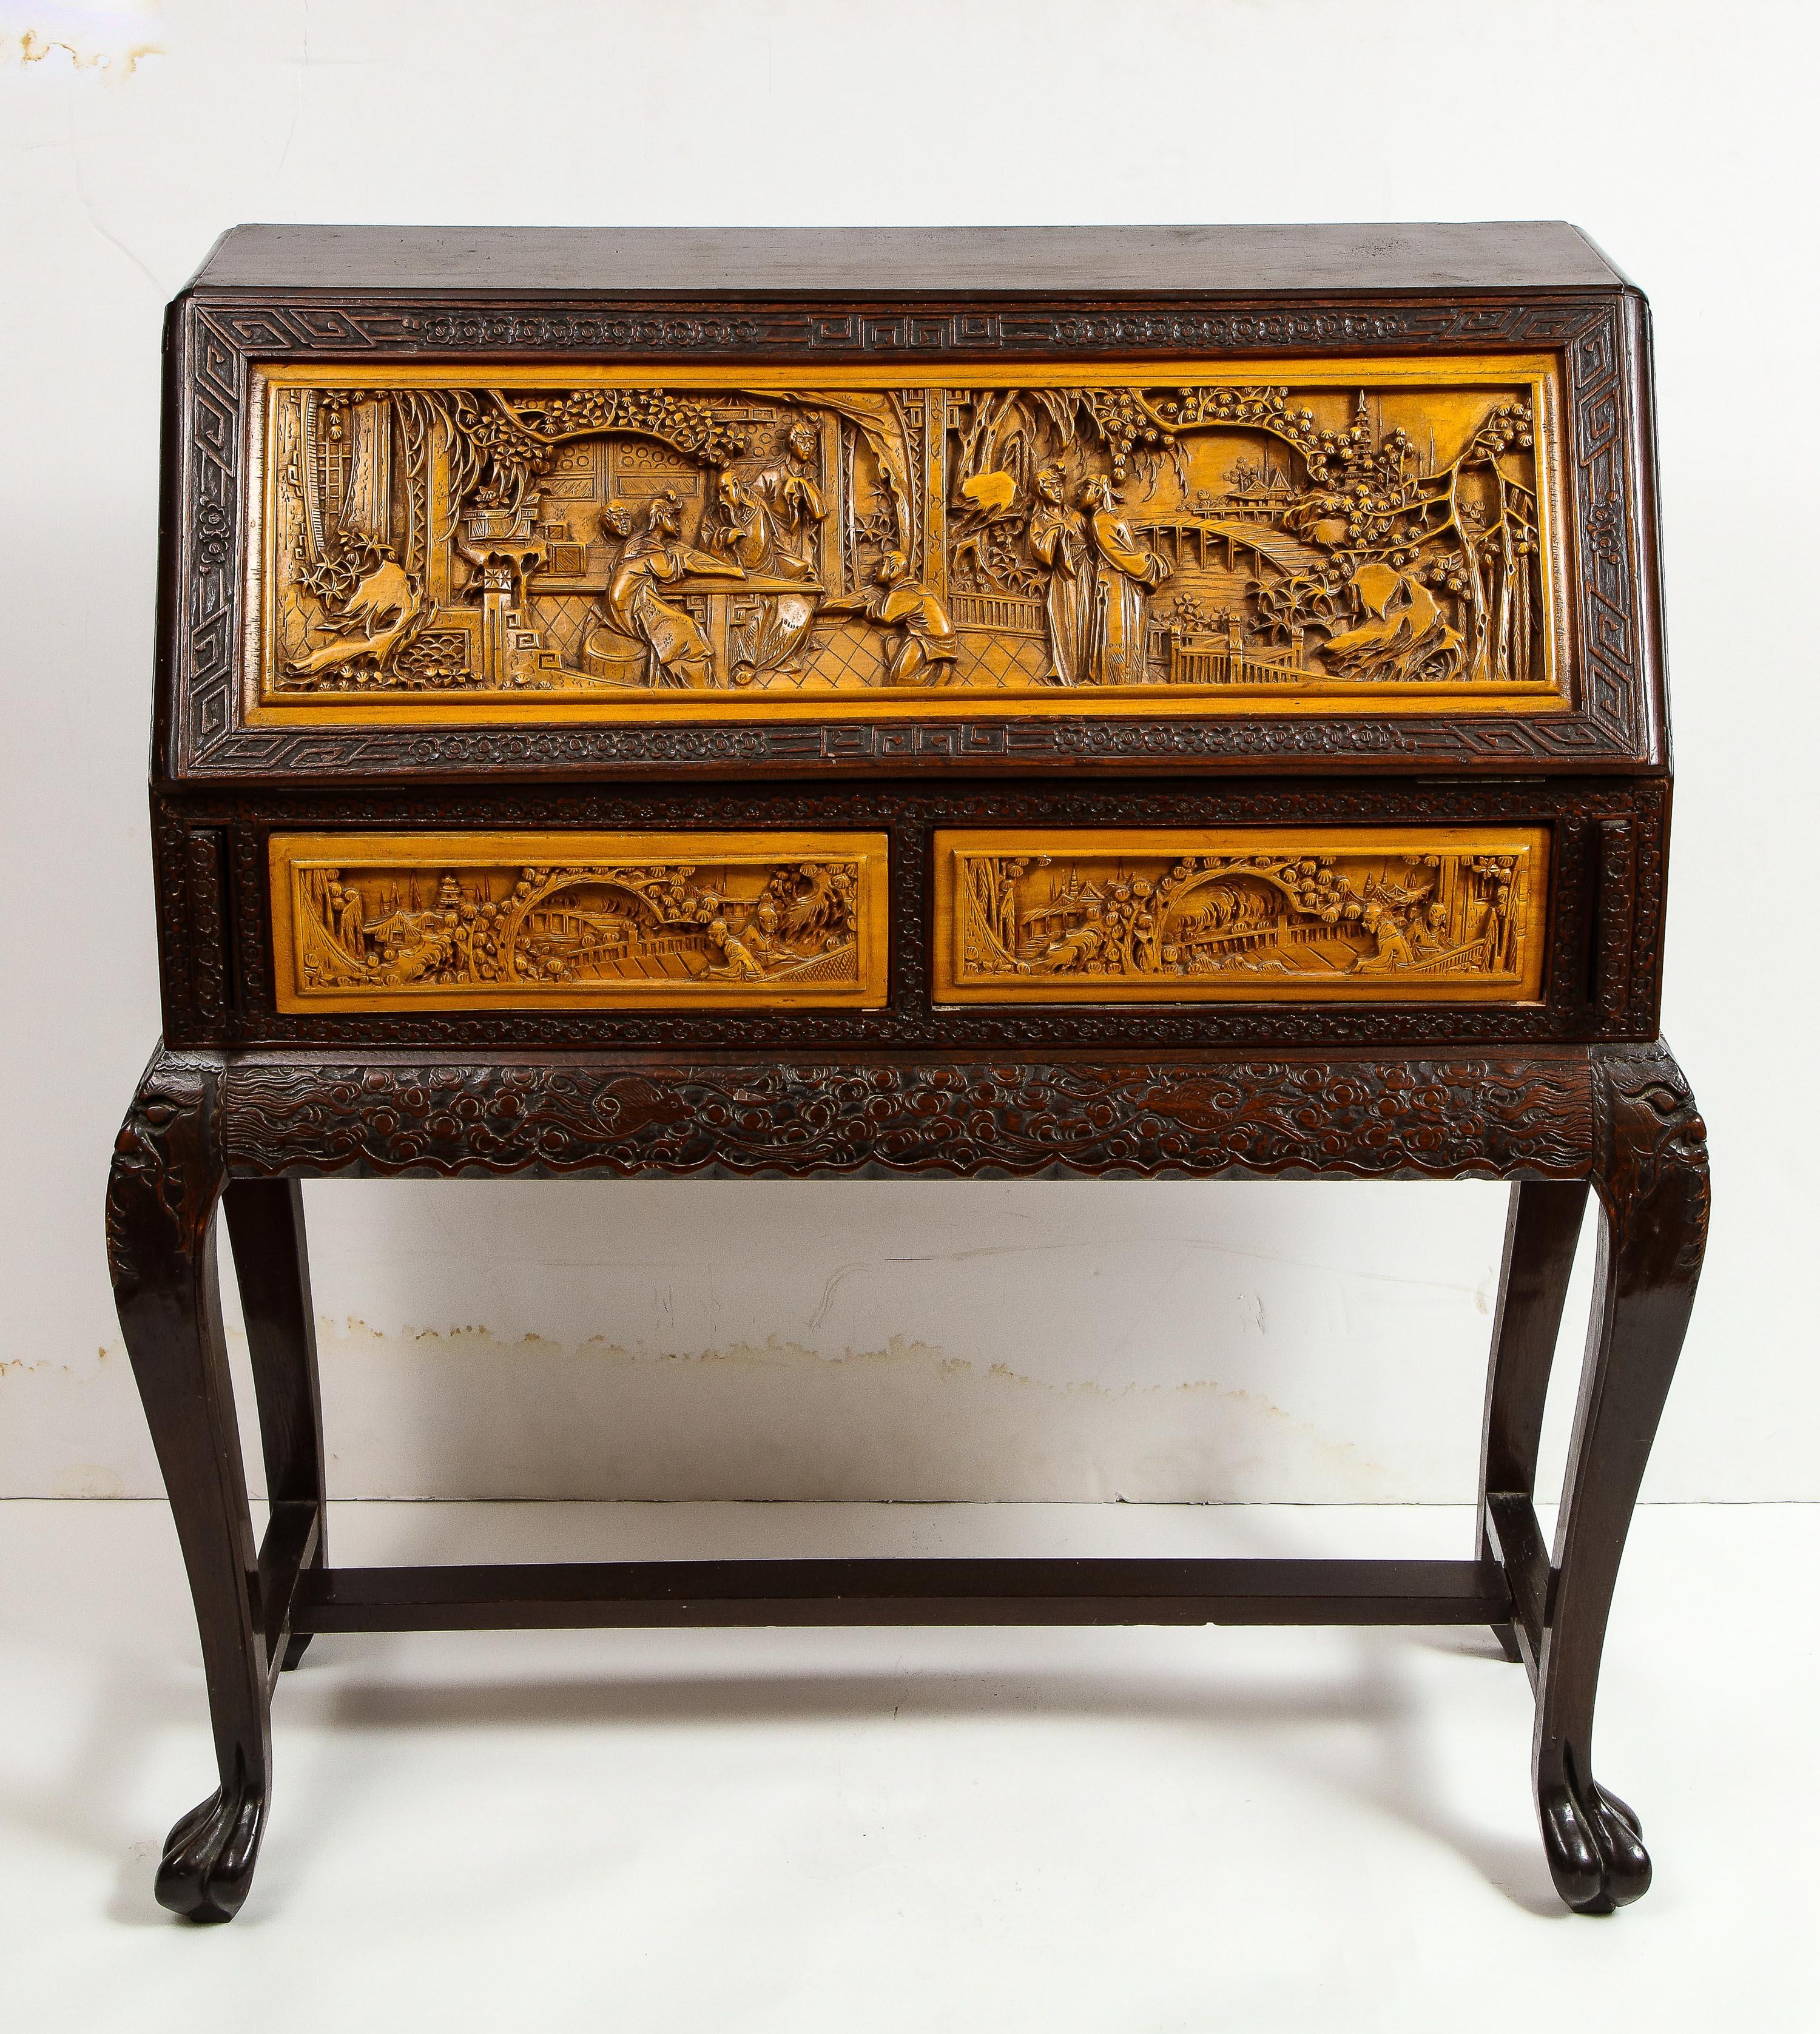 Chinese export carved figural hard wood desk cabinet, circa 1900s.

Depicting scenes of Chinese men and woman throughout. Hand carved. Very nice quality.

2 drawers. Drop down top.

Good condition overall. Slight warp to lid, shrinkage split to